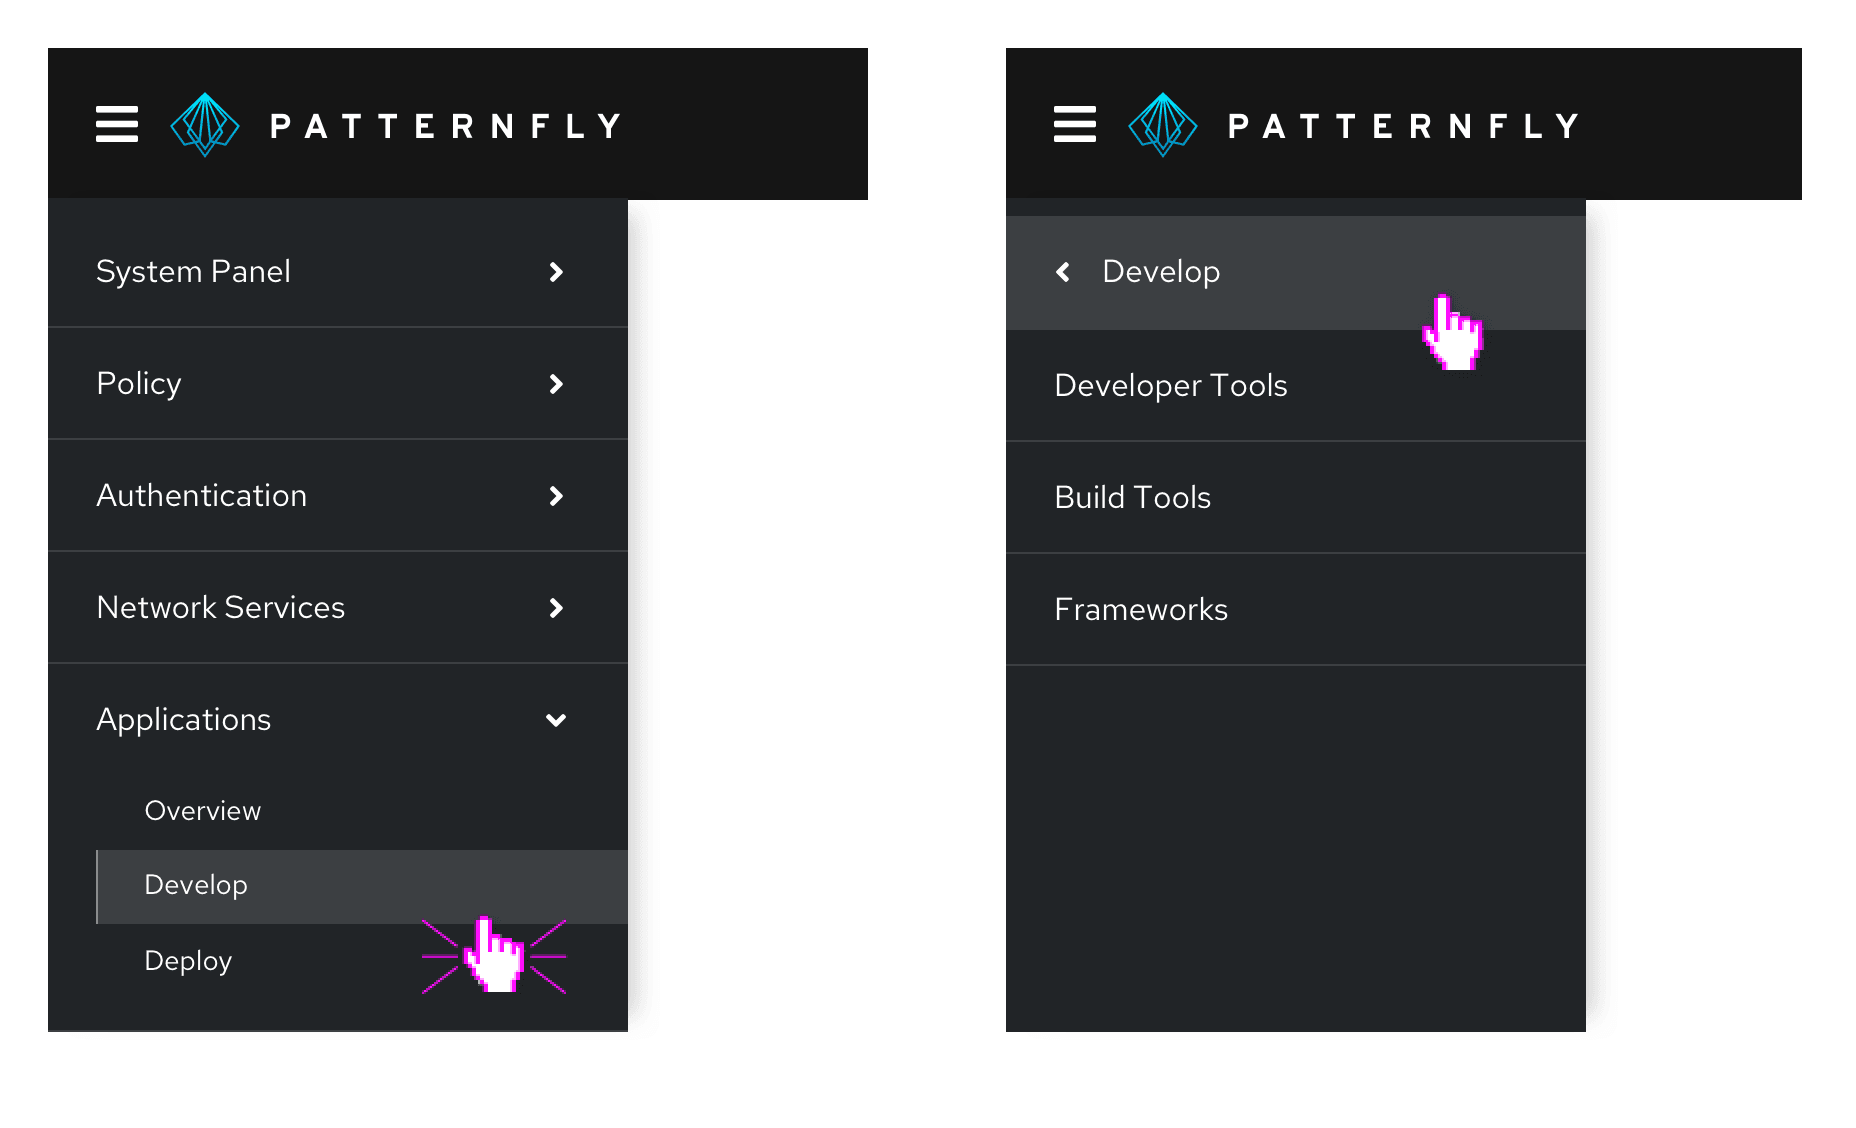 Example of composable navigation with expansion and drill-down menus